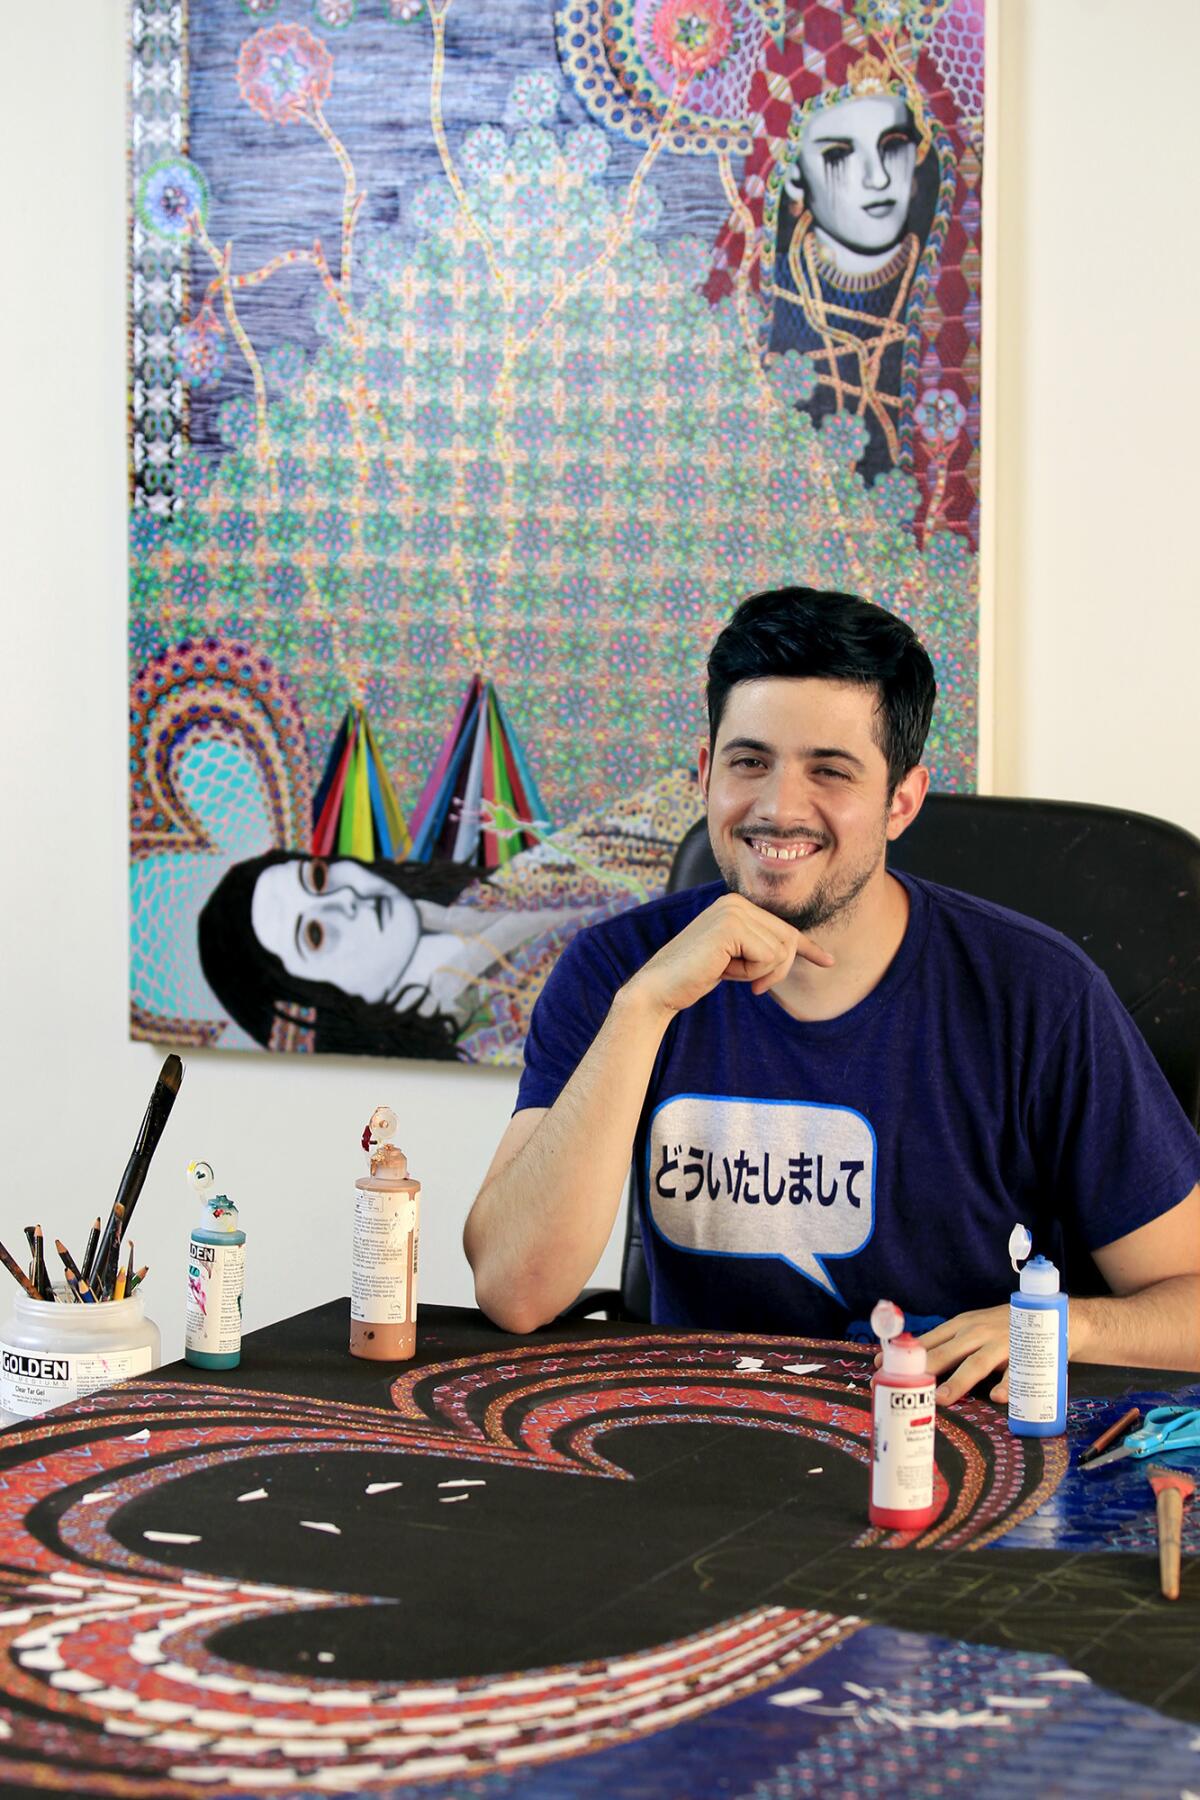 Artist Asad Faulwell, 31, poses for a photo at his home studio in Newport Beach. The Orange County Museum of Art will host Art Auction 2014, with more than 60 museum-quality works of art that will be auctioned off on March 14. Proceeds benefit the museum's exhibition and education programs.